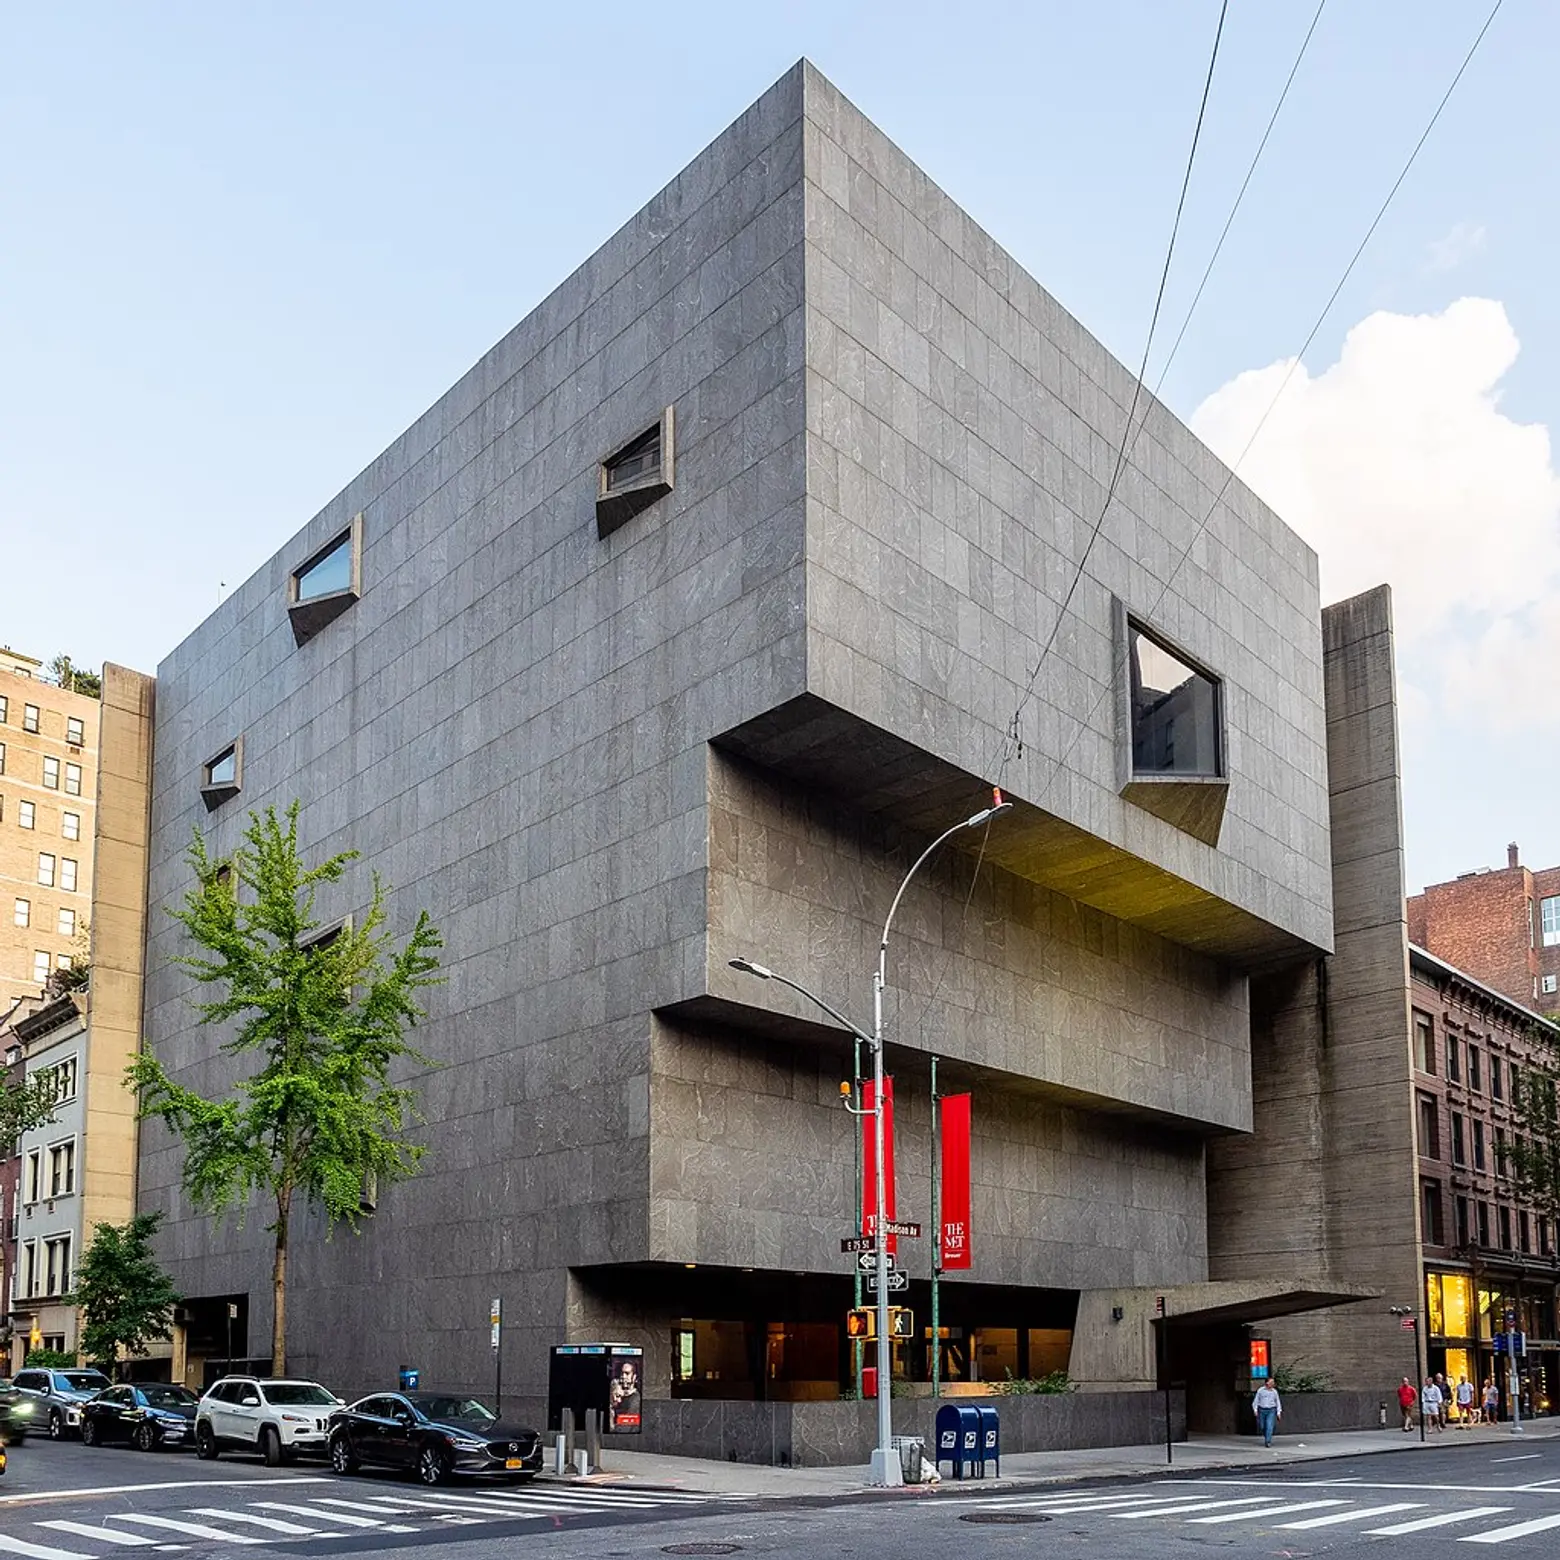 The Frick Collection’s temporary home in Madison Avenue’s Breuer building is opening next month